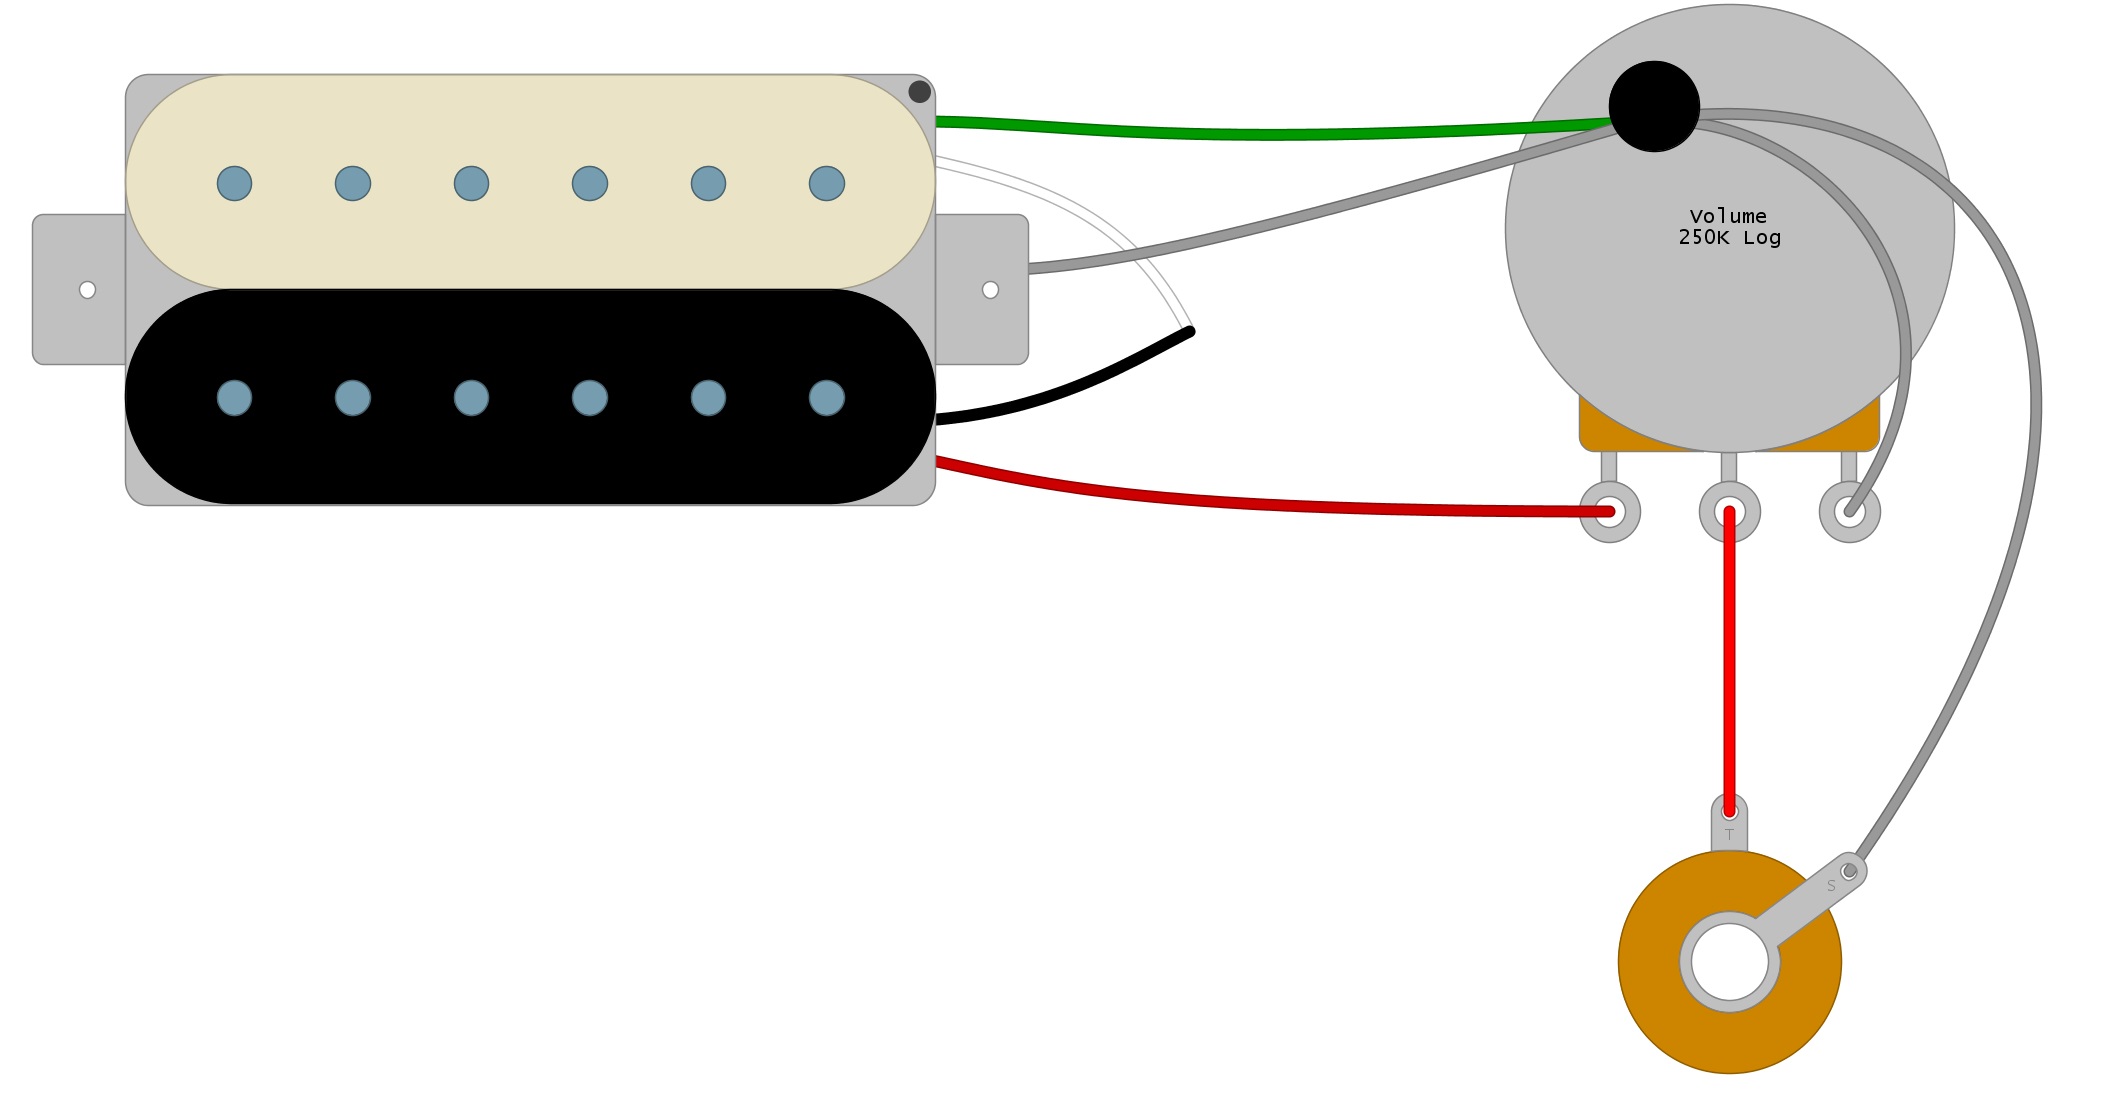 Wiring Diagram Telecaster One Humbucker One Single Coil from humbuckersoup.com